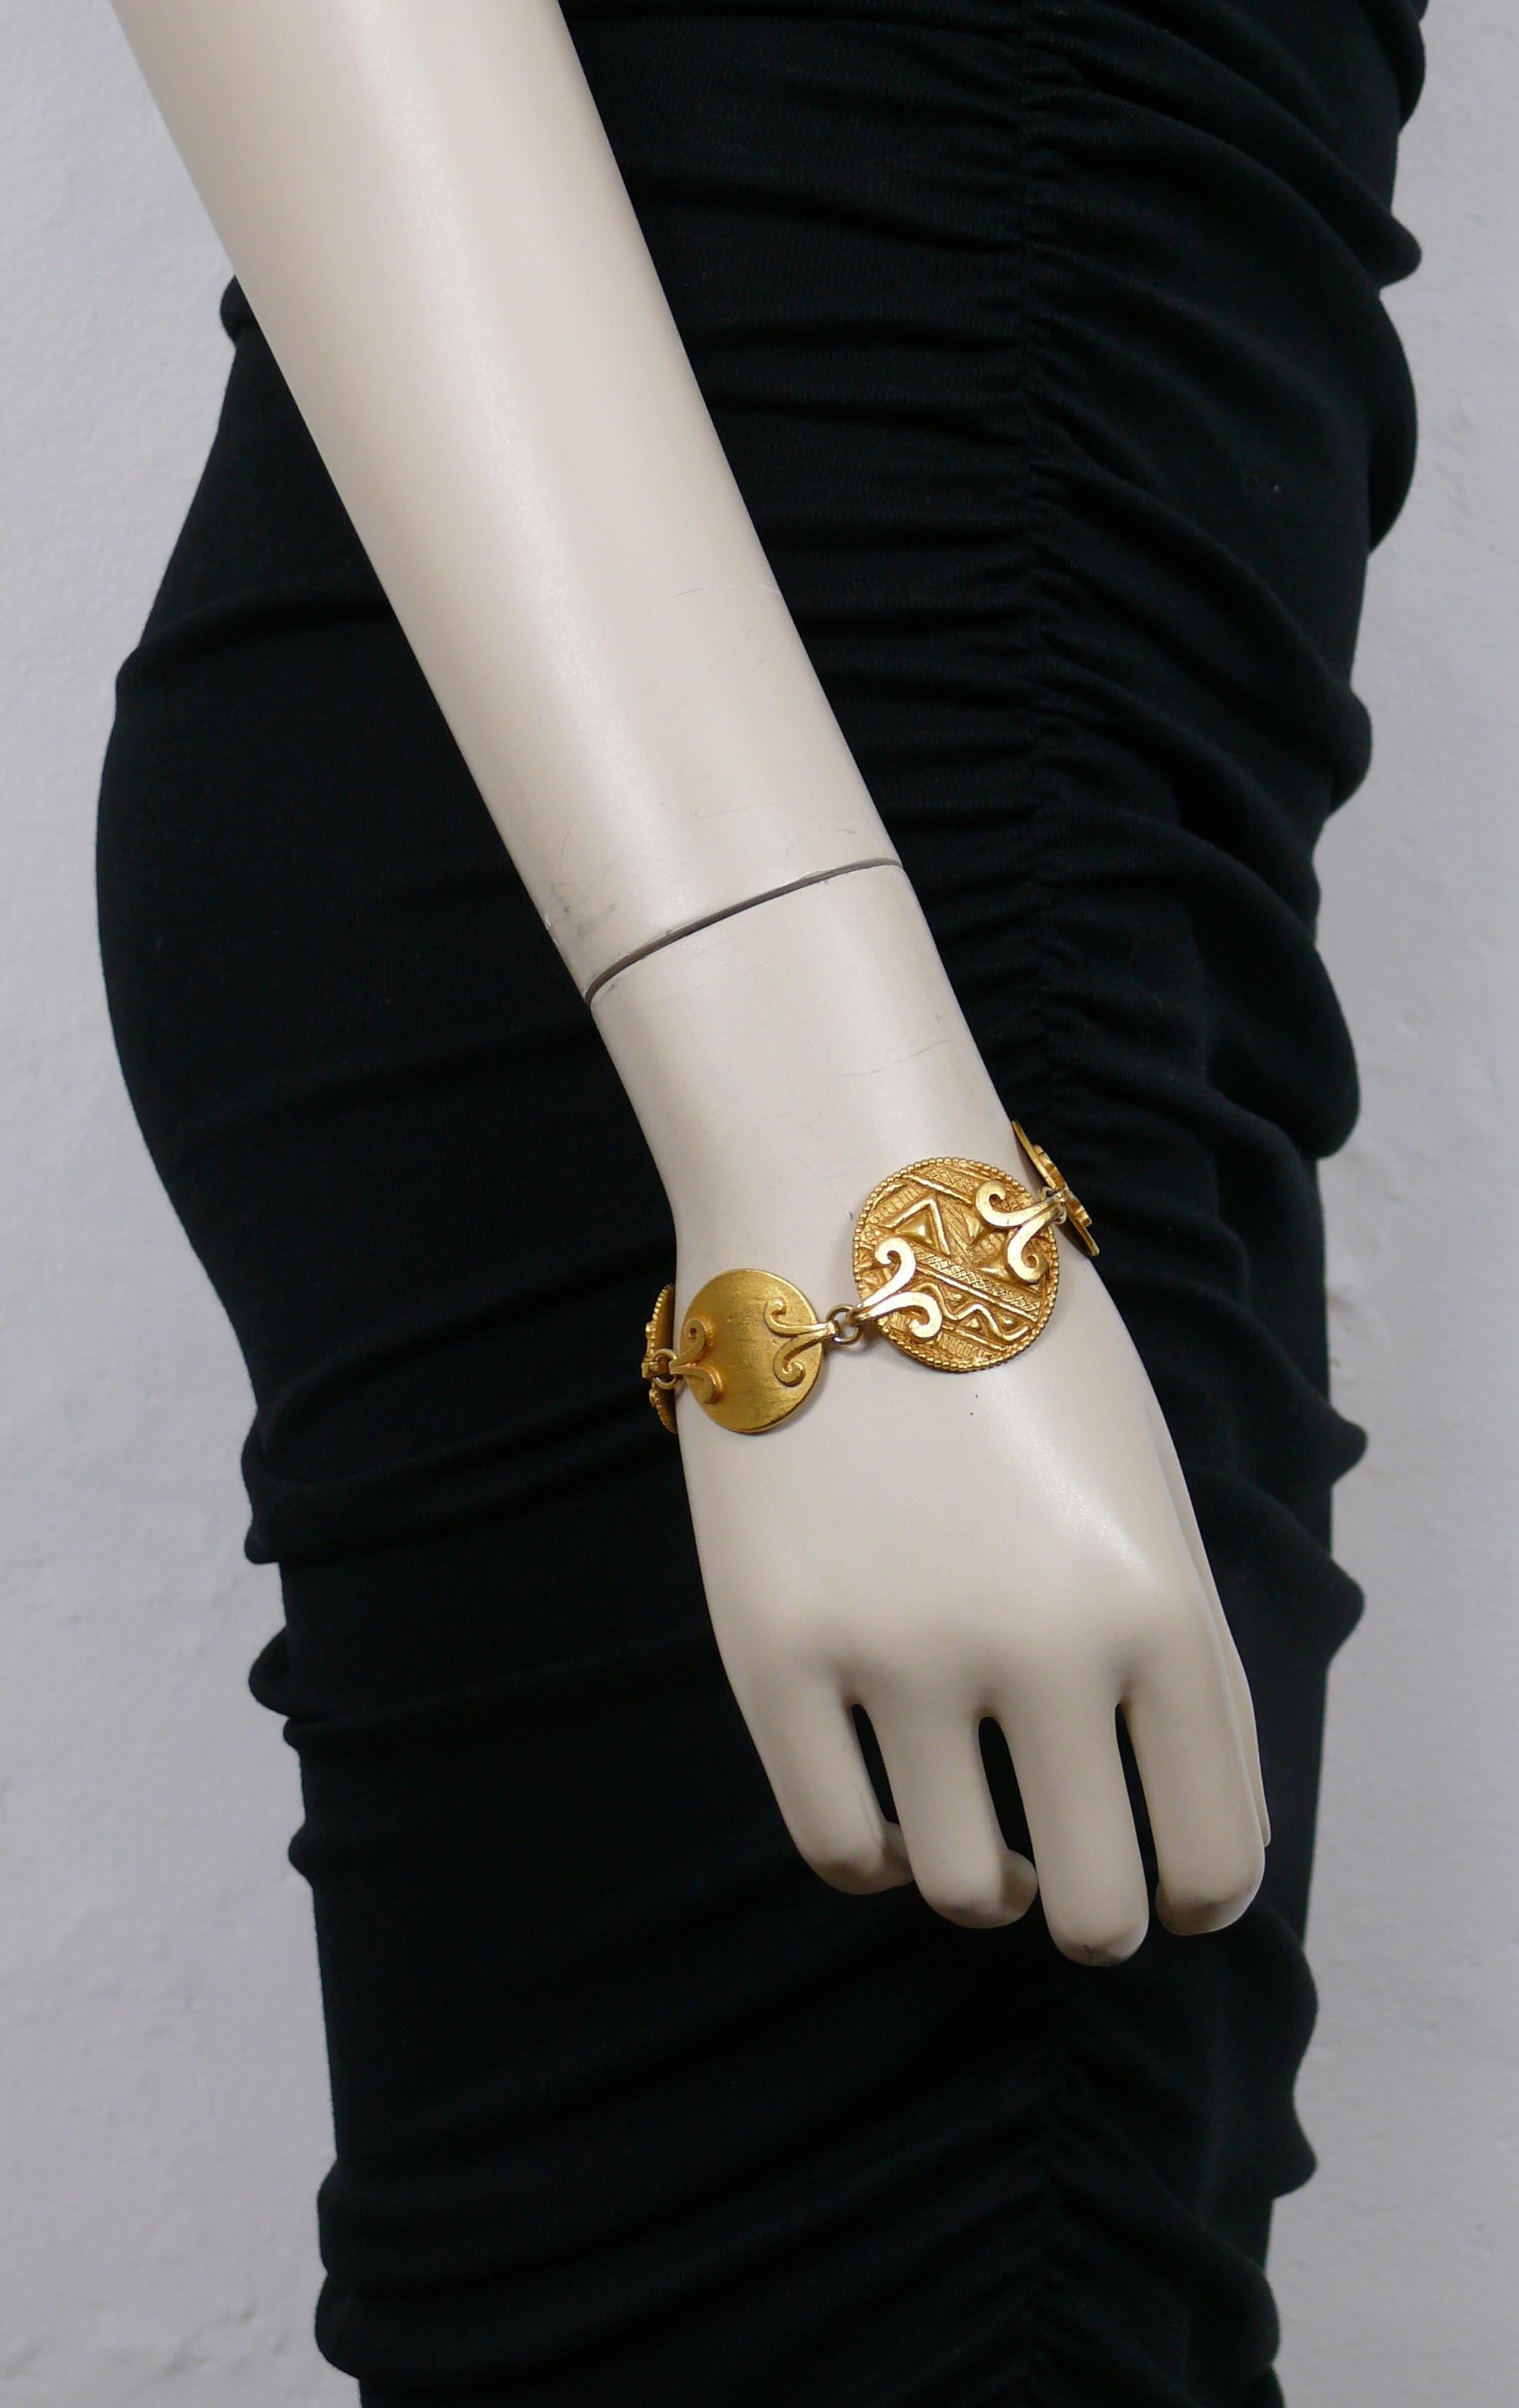 YVES SAINT LAURENT vintage gold toned bracelet featuring African inspired geometric design round textured links.

T-bar and toggle closure.

Embossed YSL Made in France.

Indicative measurements : length approx. 19 cm (7.48 inches) / max. link